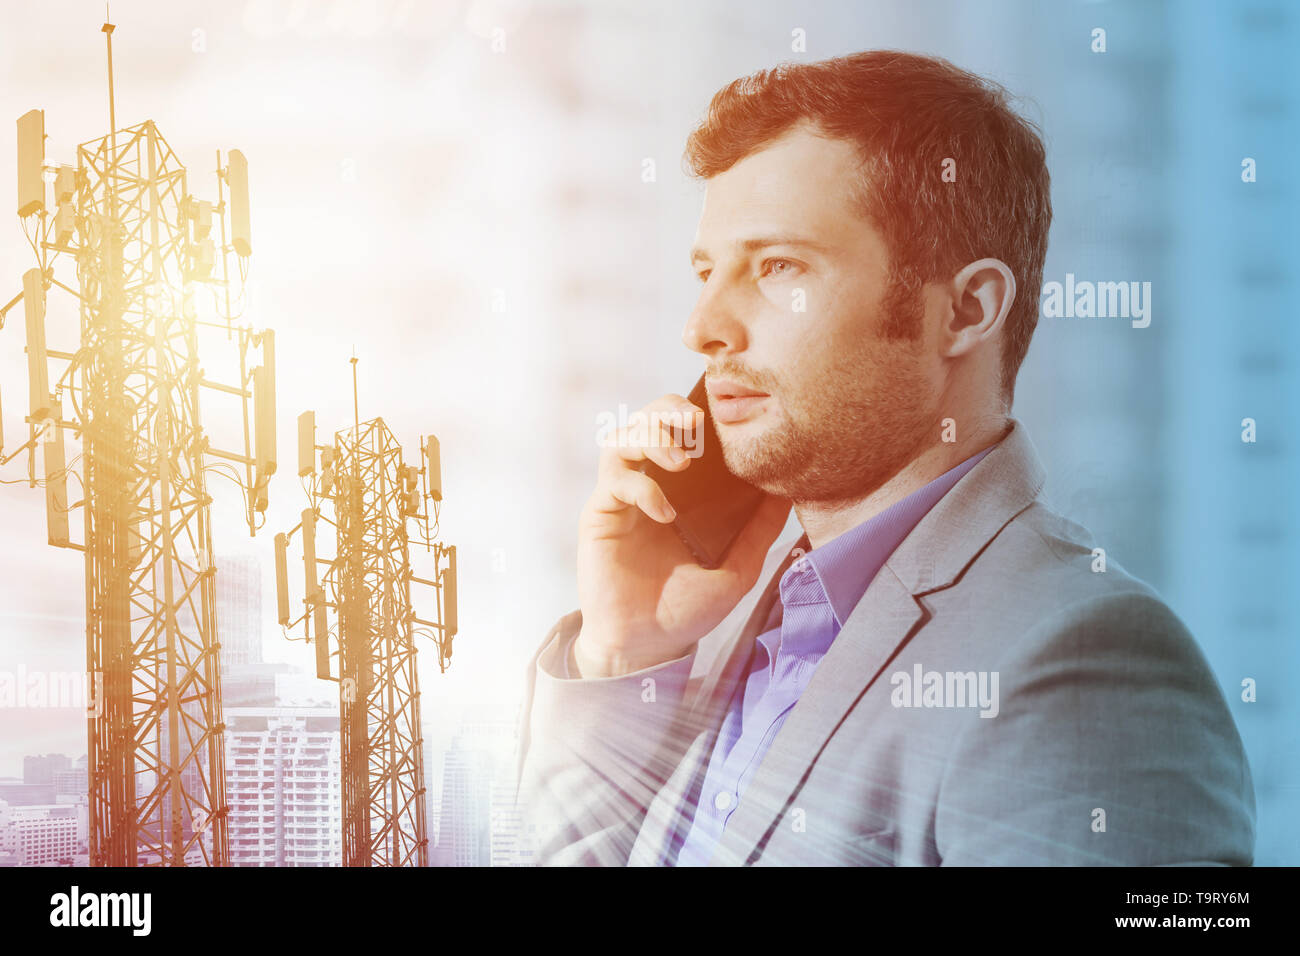 Busineesman on phone call for modern Telecommunication technology for business concept Stock Photo